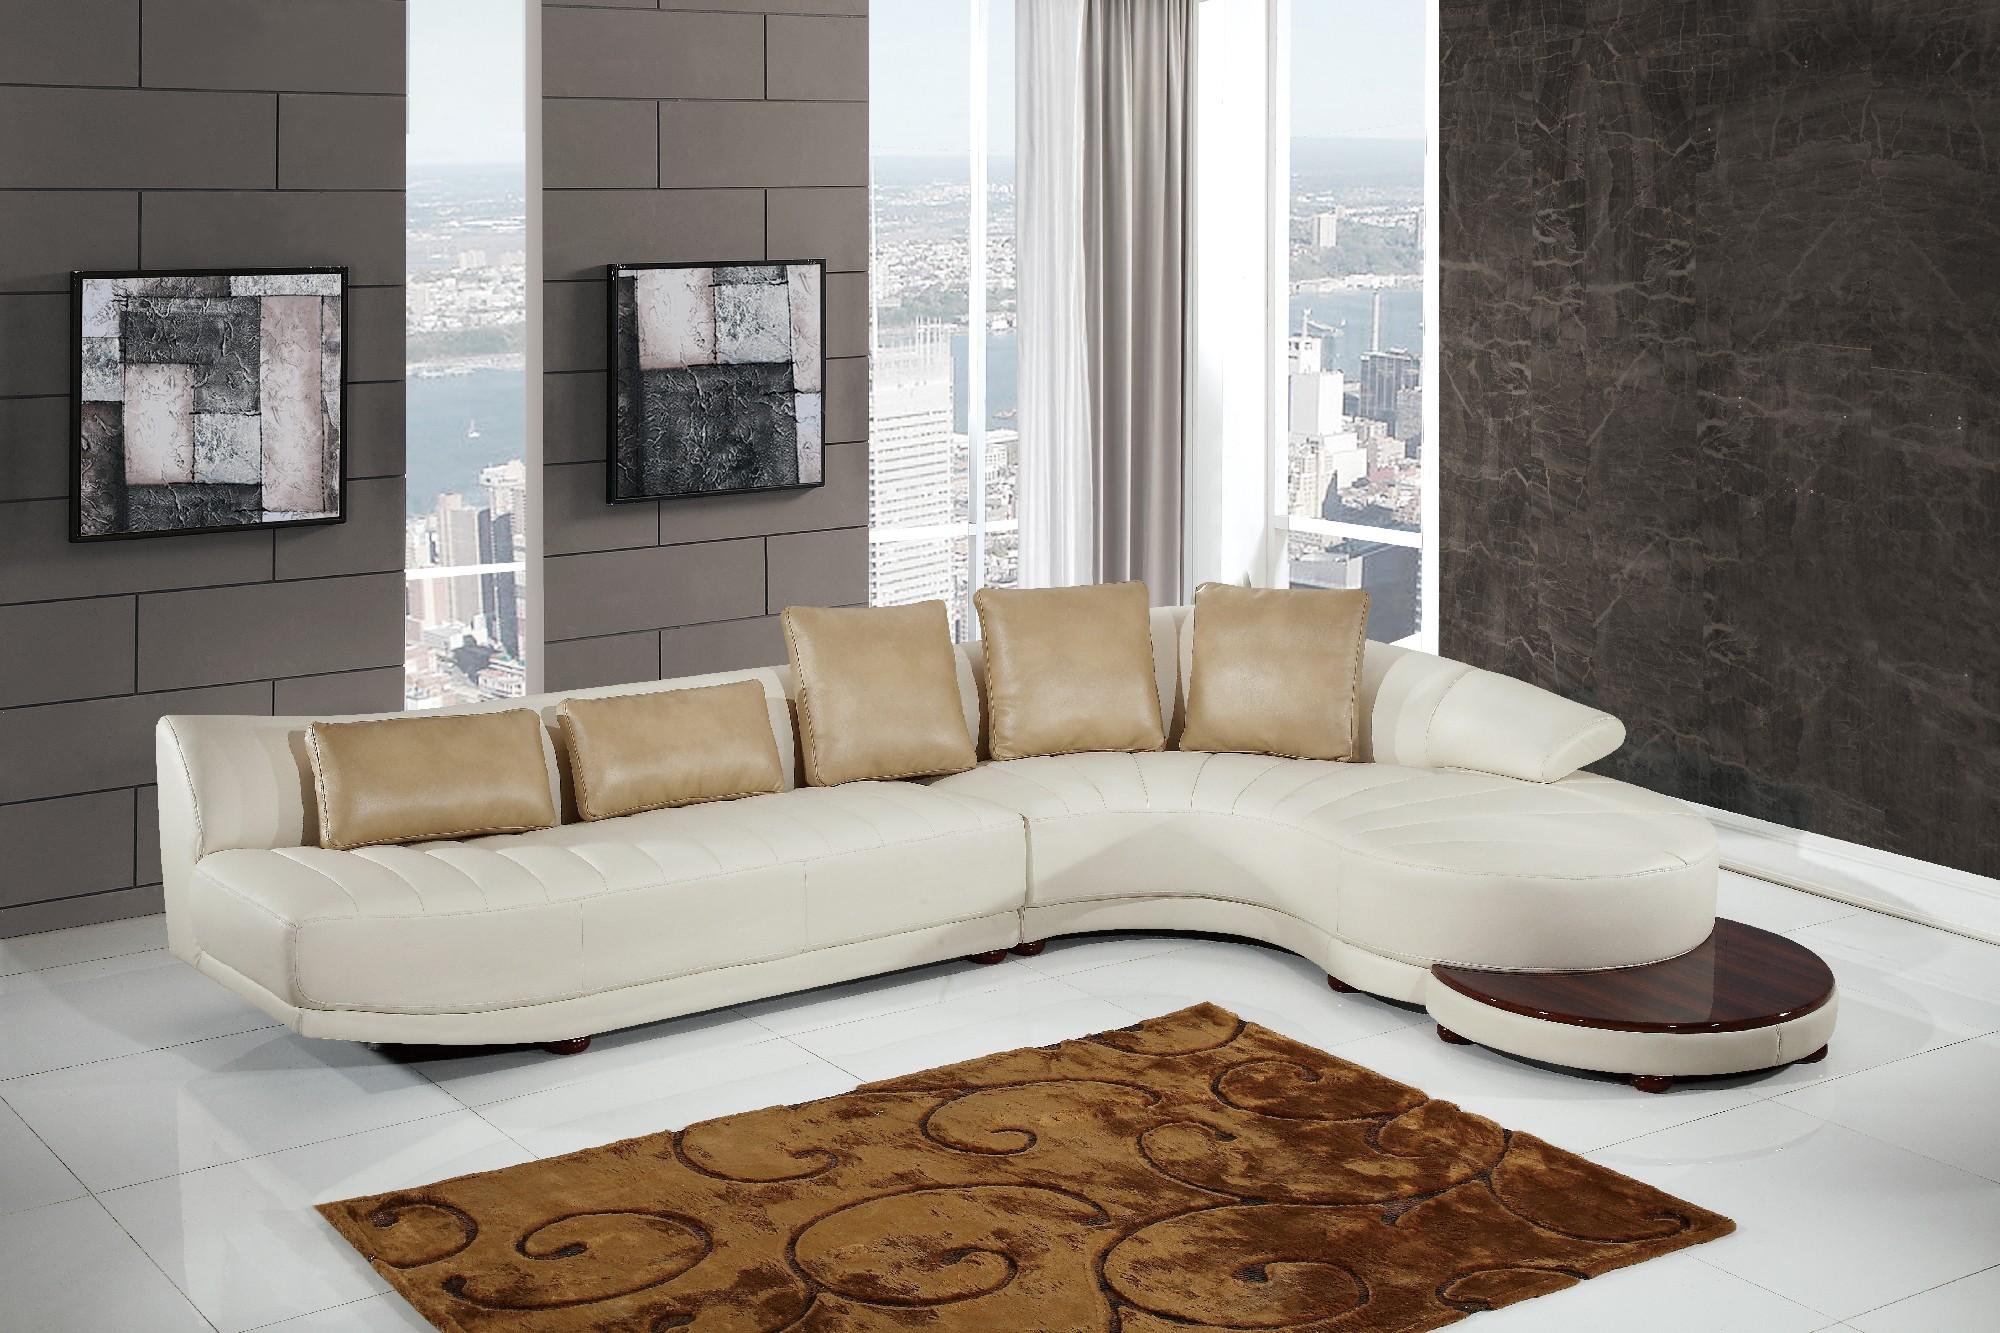 

    
Global Furniture UFM208-SEC Modern Beige and White Bonded Leather Curved Sofa & End Table
